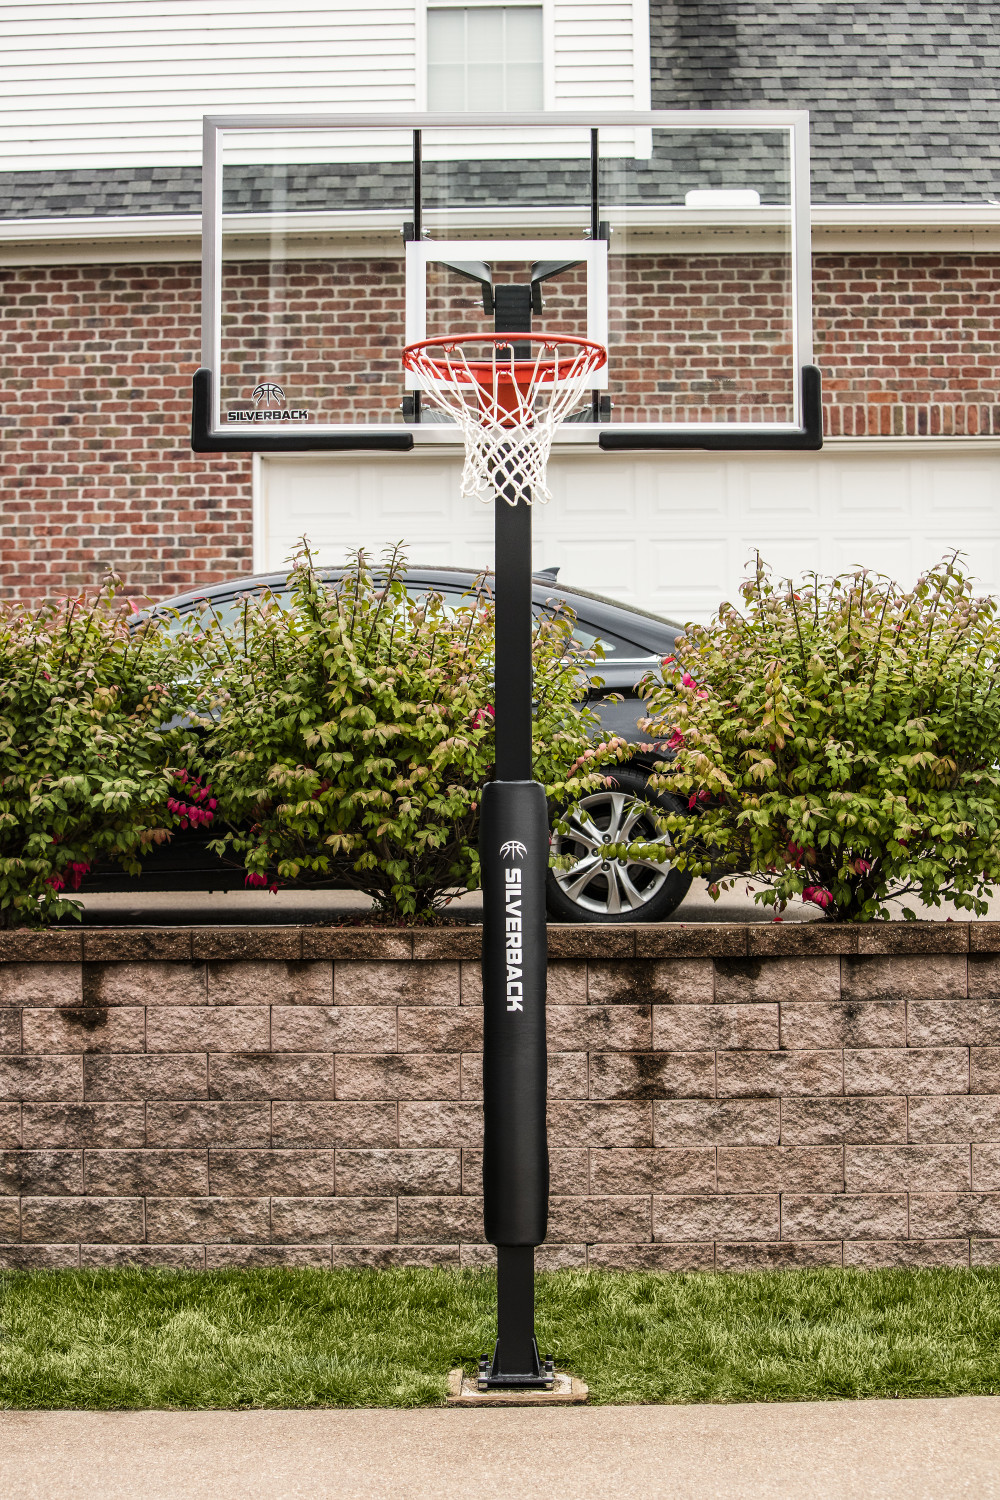 Silverback 60" In-Ground Basketball System with Adjustable-Height Tempered Glass Backboard and Pro-Style Breakaway Rim - image 5 of 23